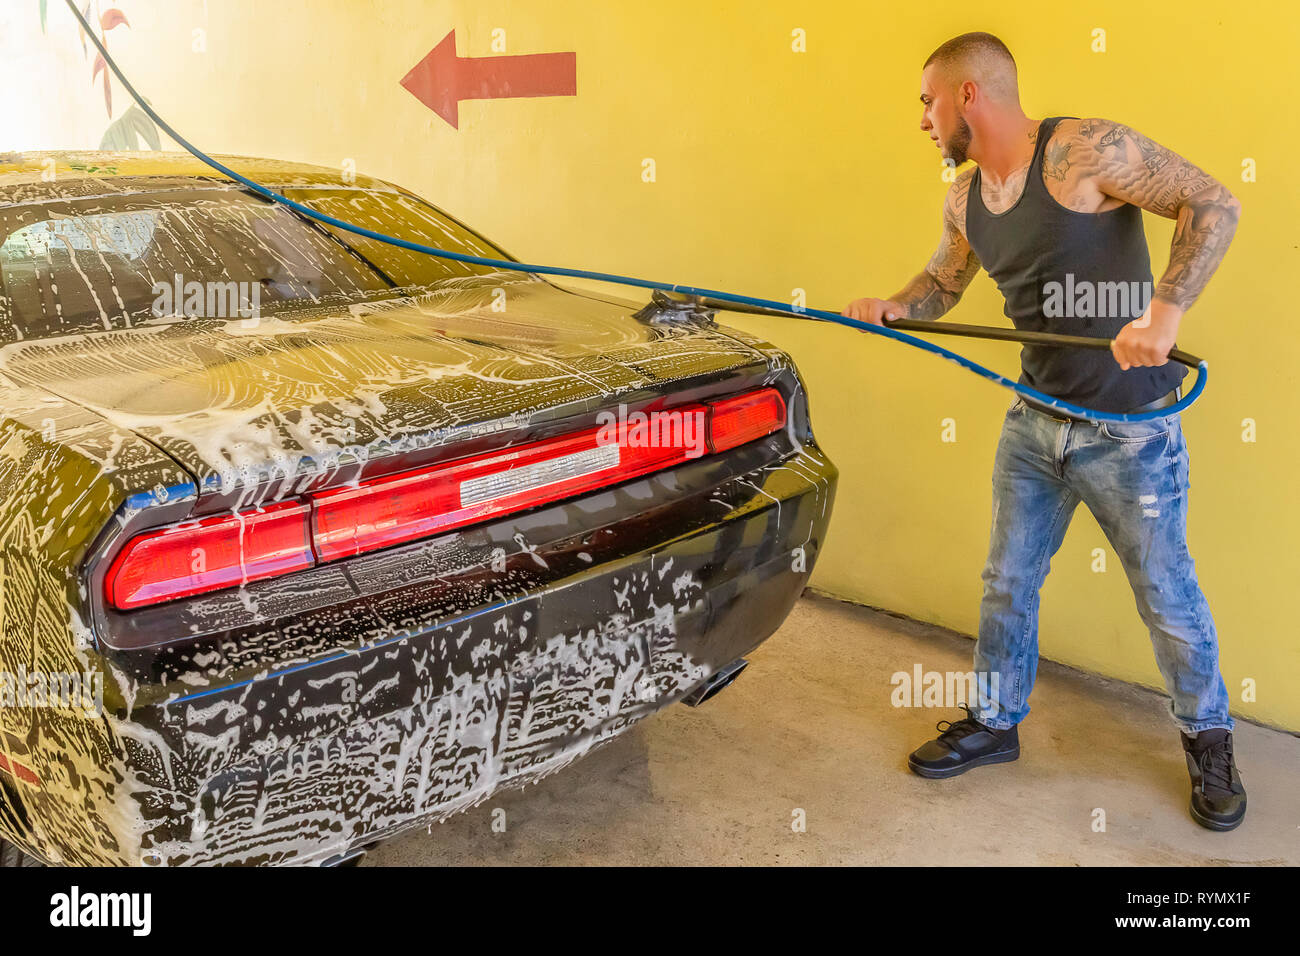 The young man soaps up his black car. The strong young man with tattoos takes pride in the details as he continues to scrub the entire car. Stock Photo